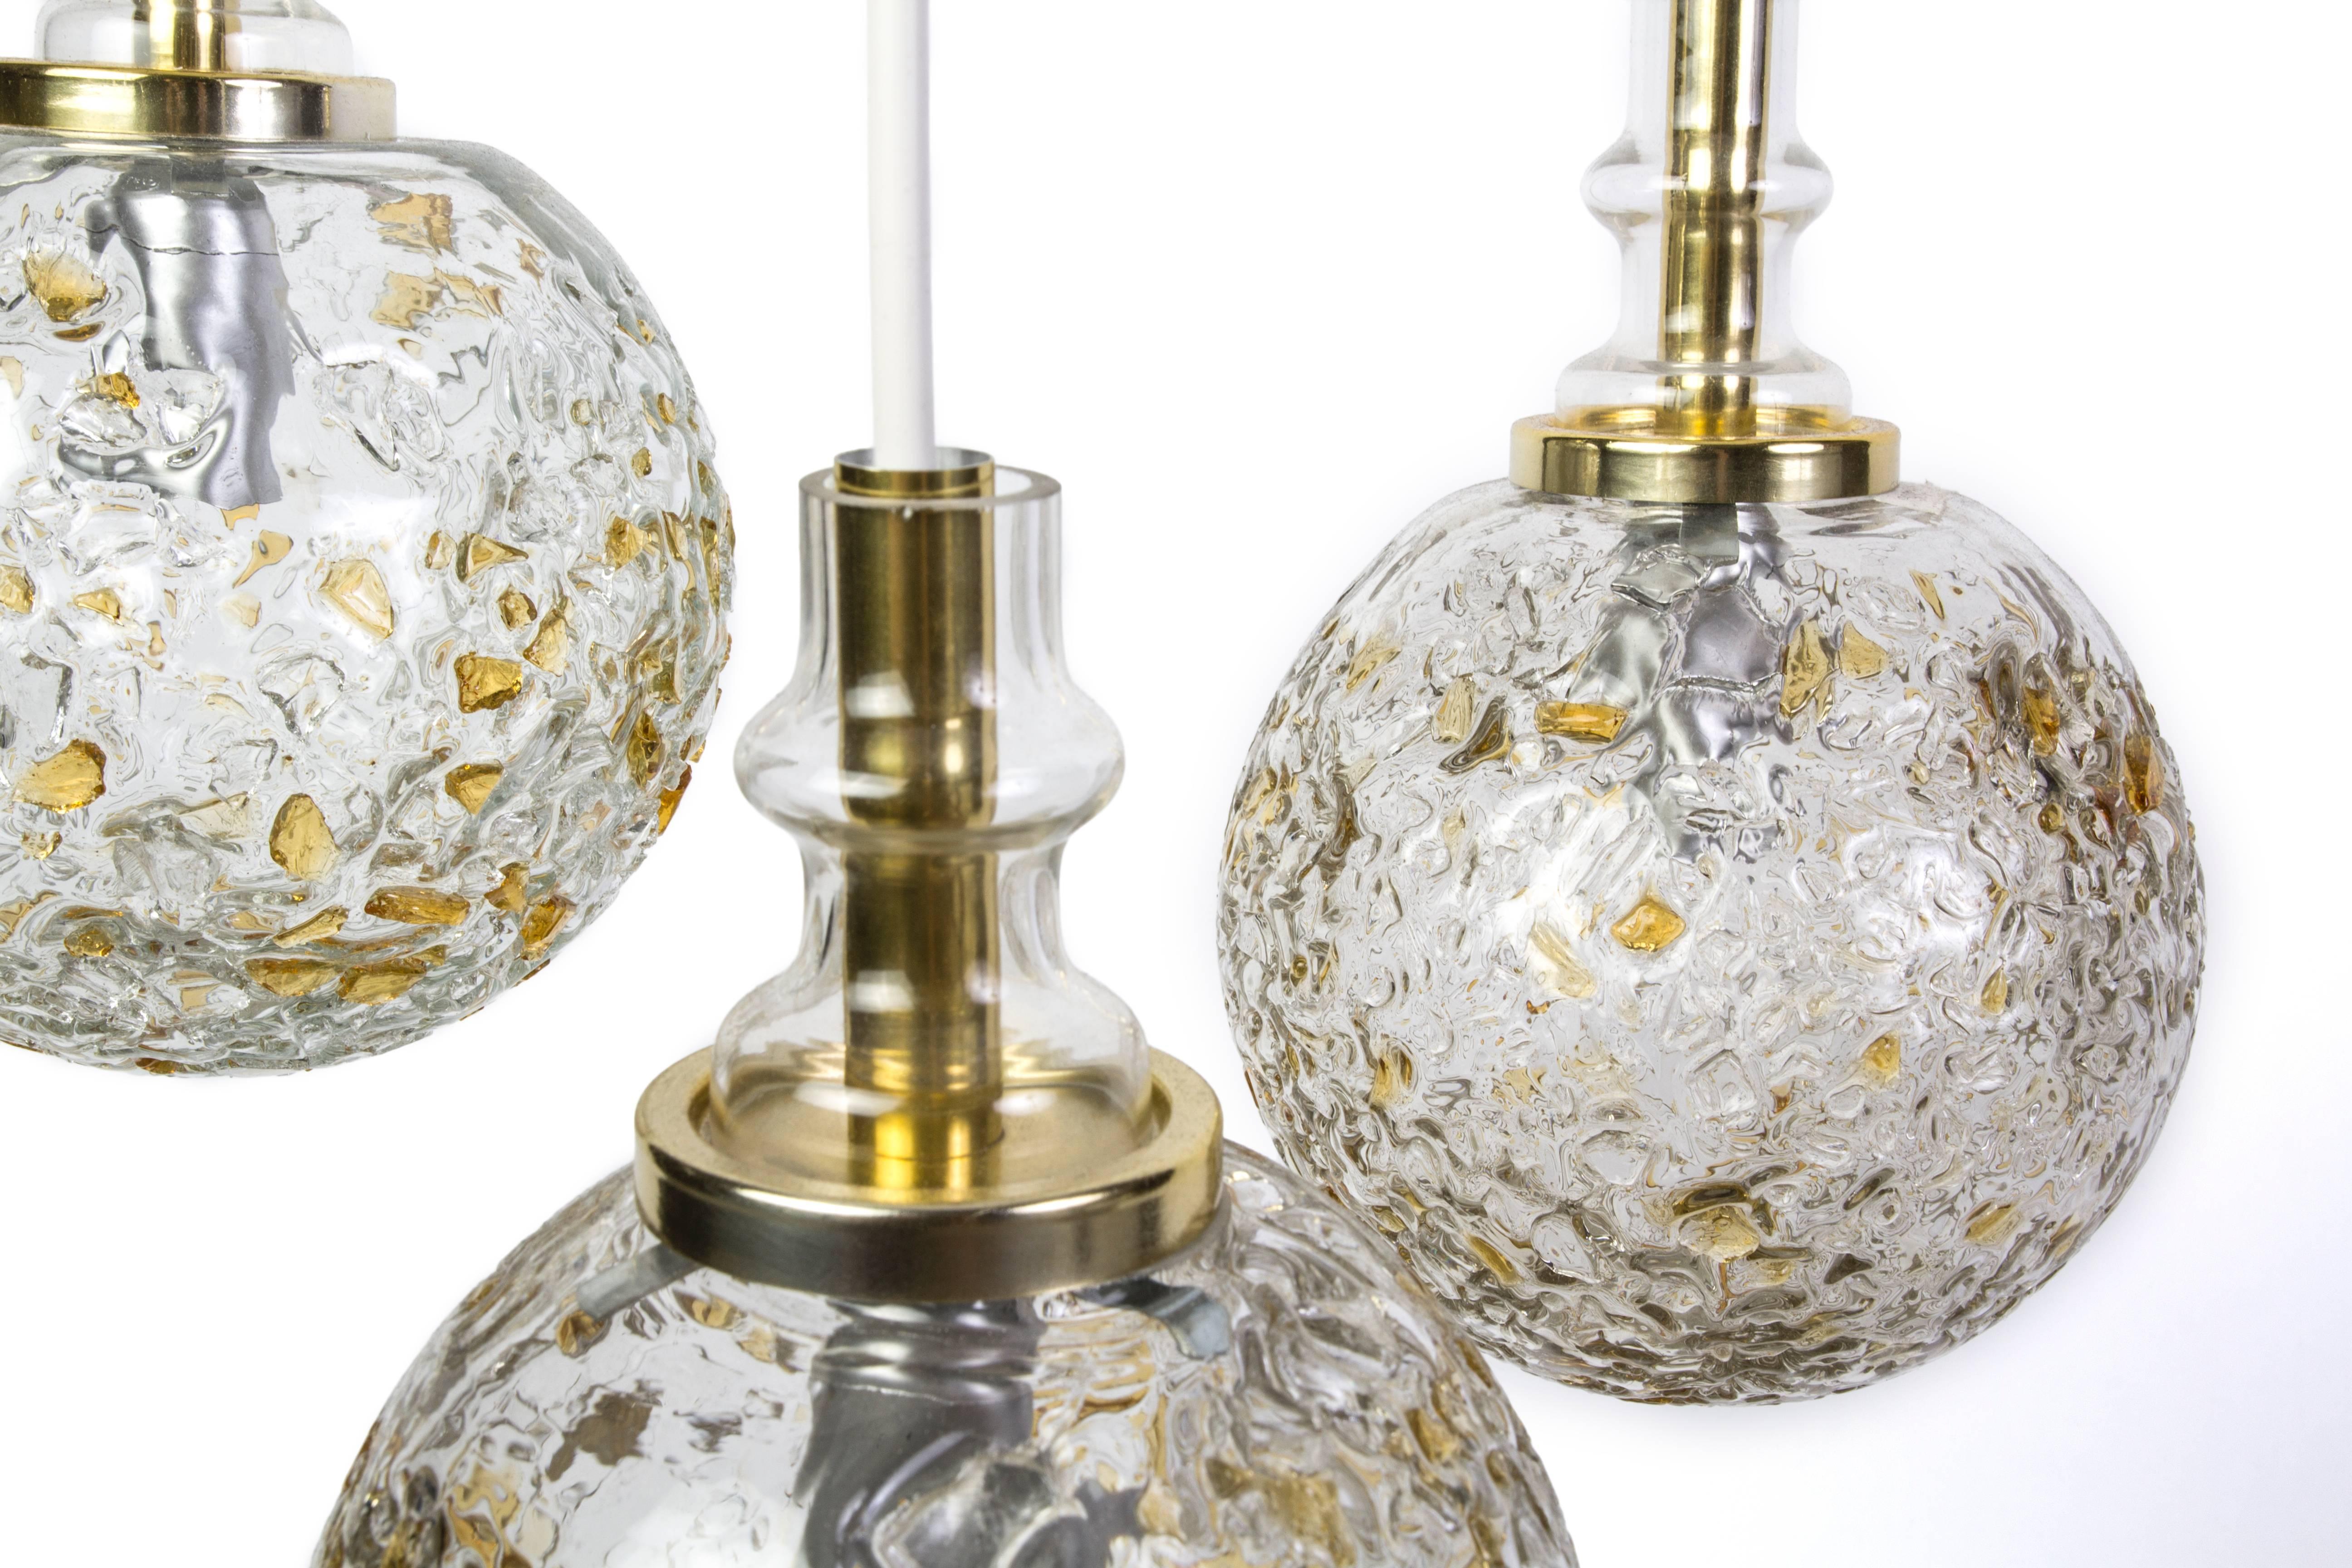 This exquisite 1960s Mid-Century Modernist chandelier was designed by Doria. It features a pendant design with three handblown etched gloss globes with hues of gold and sand.
                   